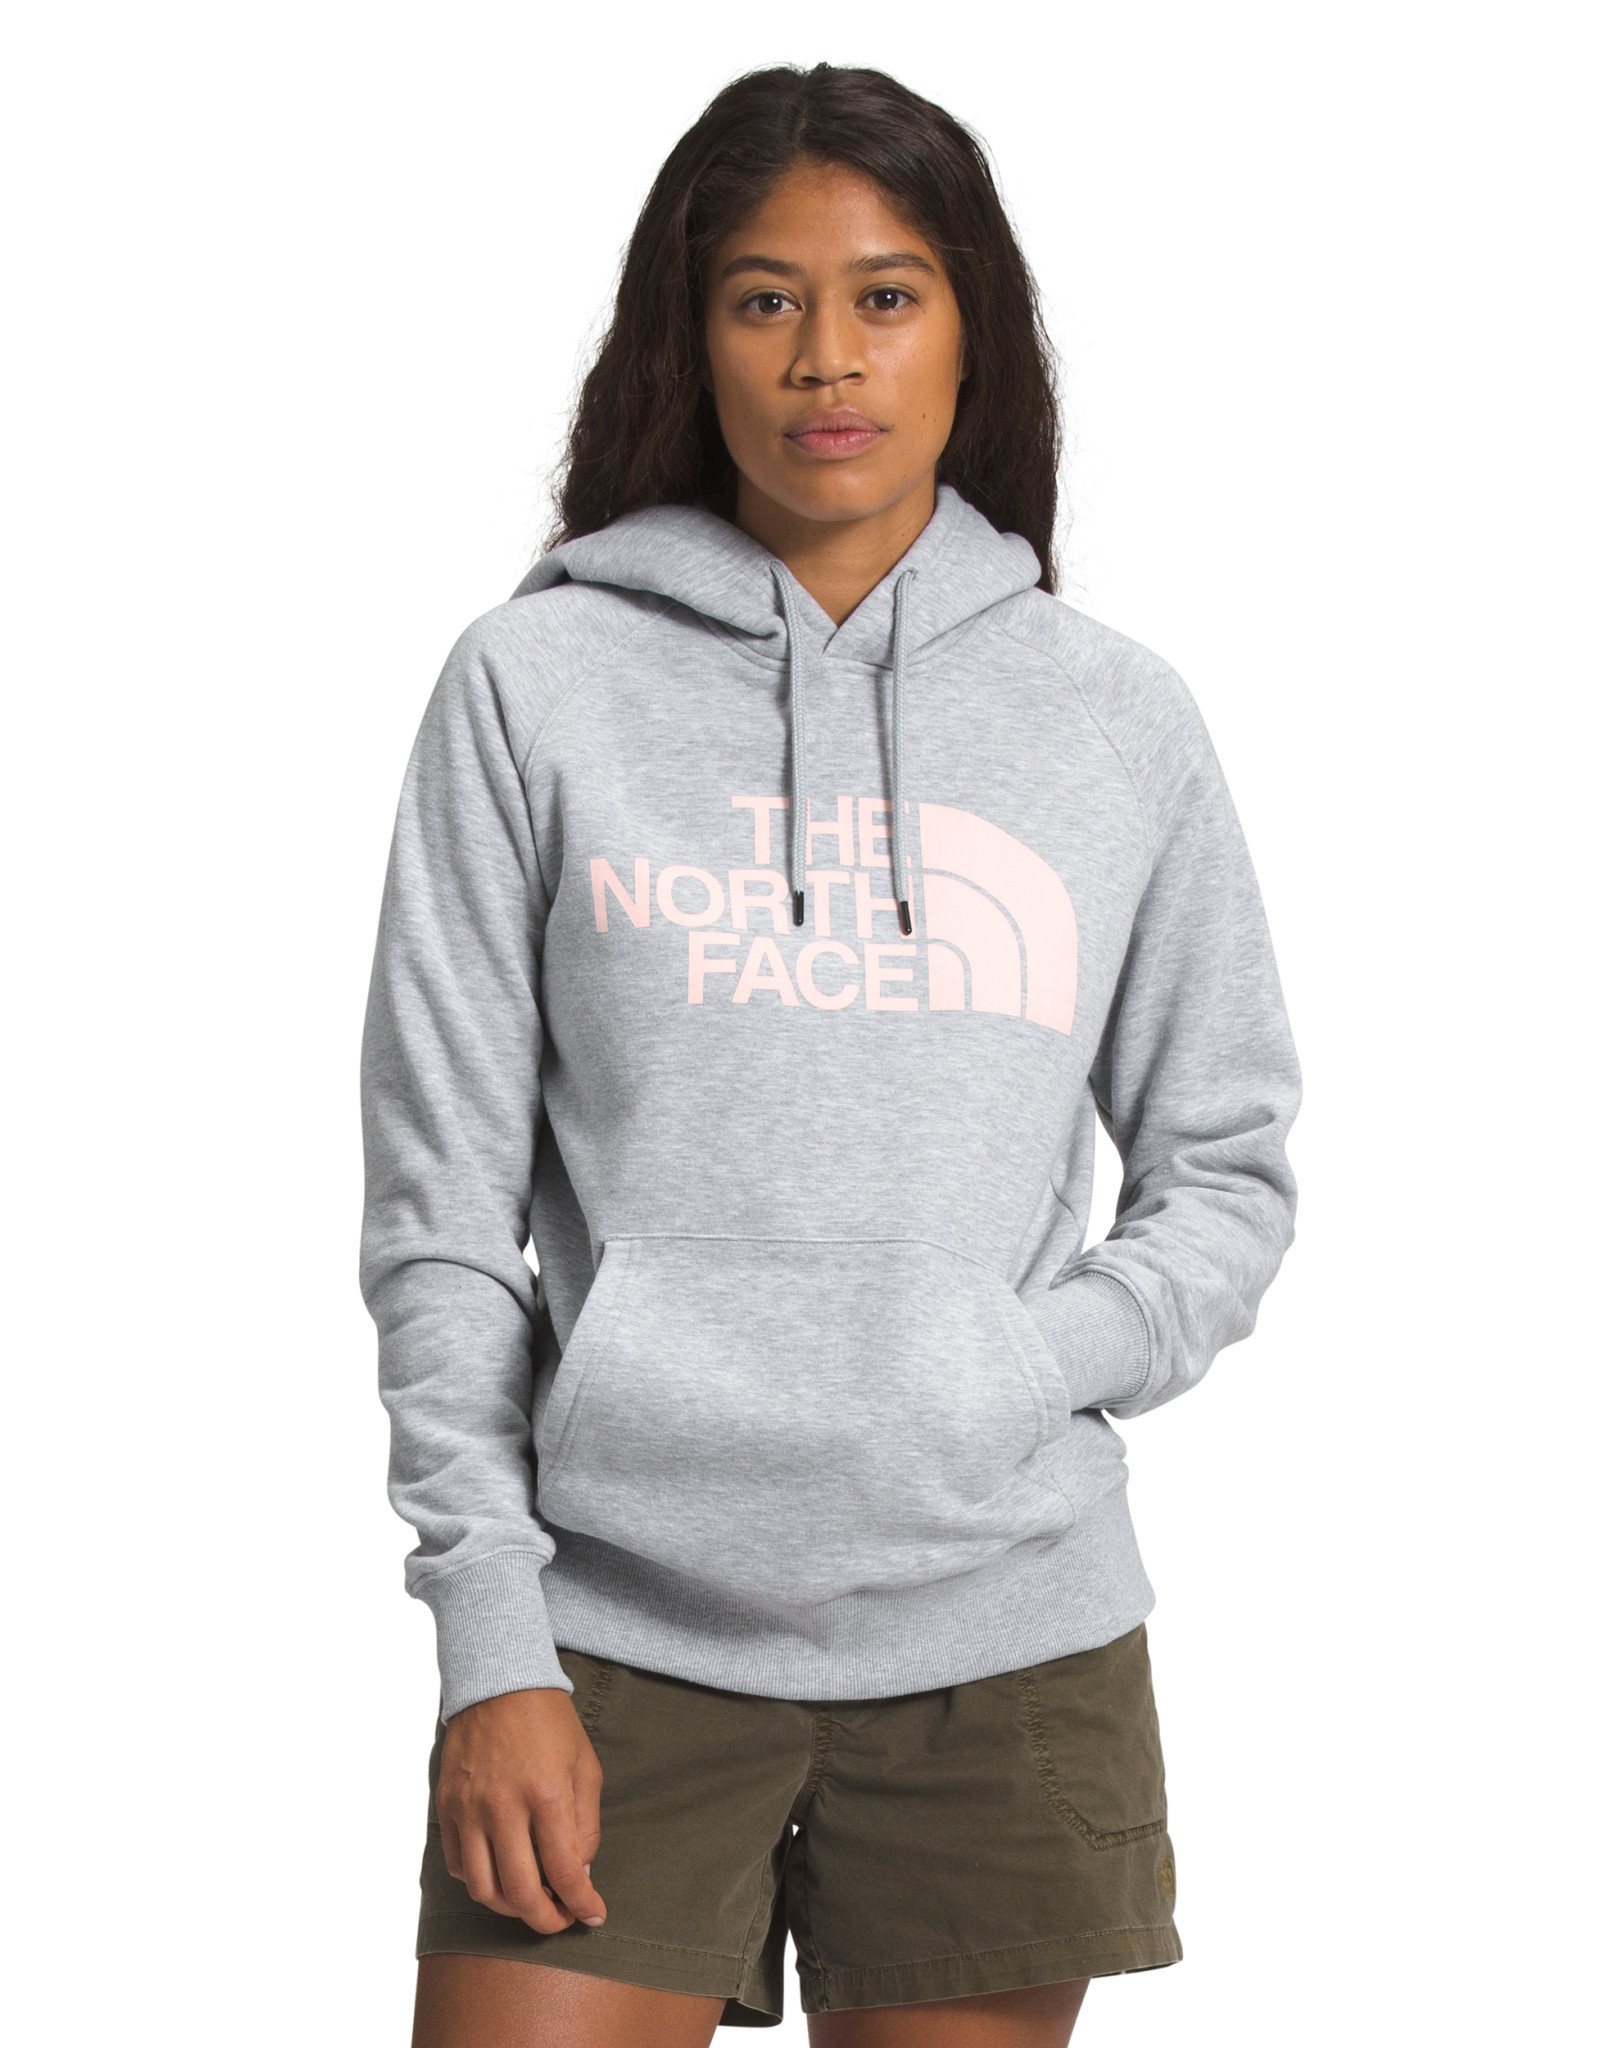 north face half dome hoodie women's